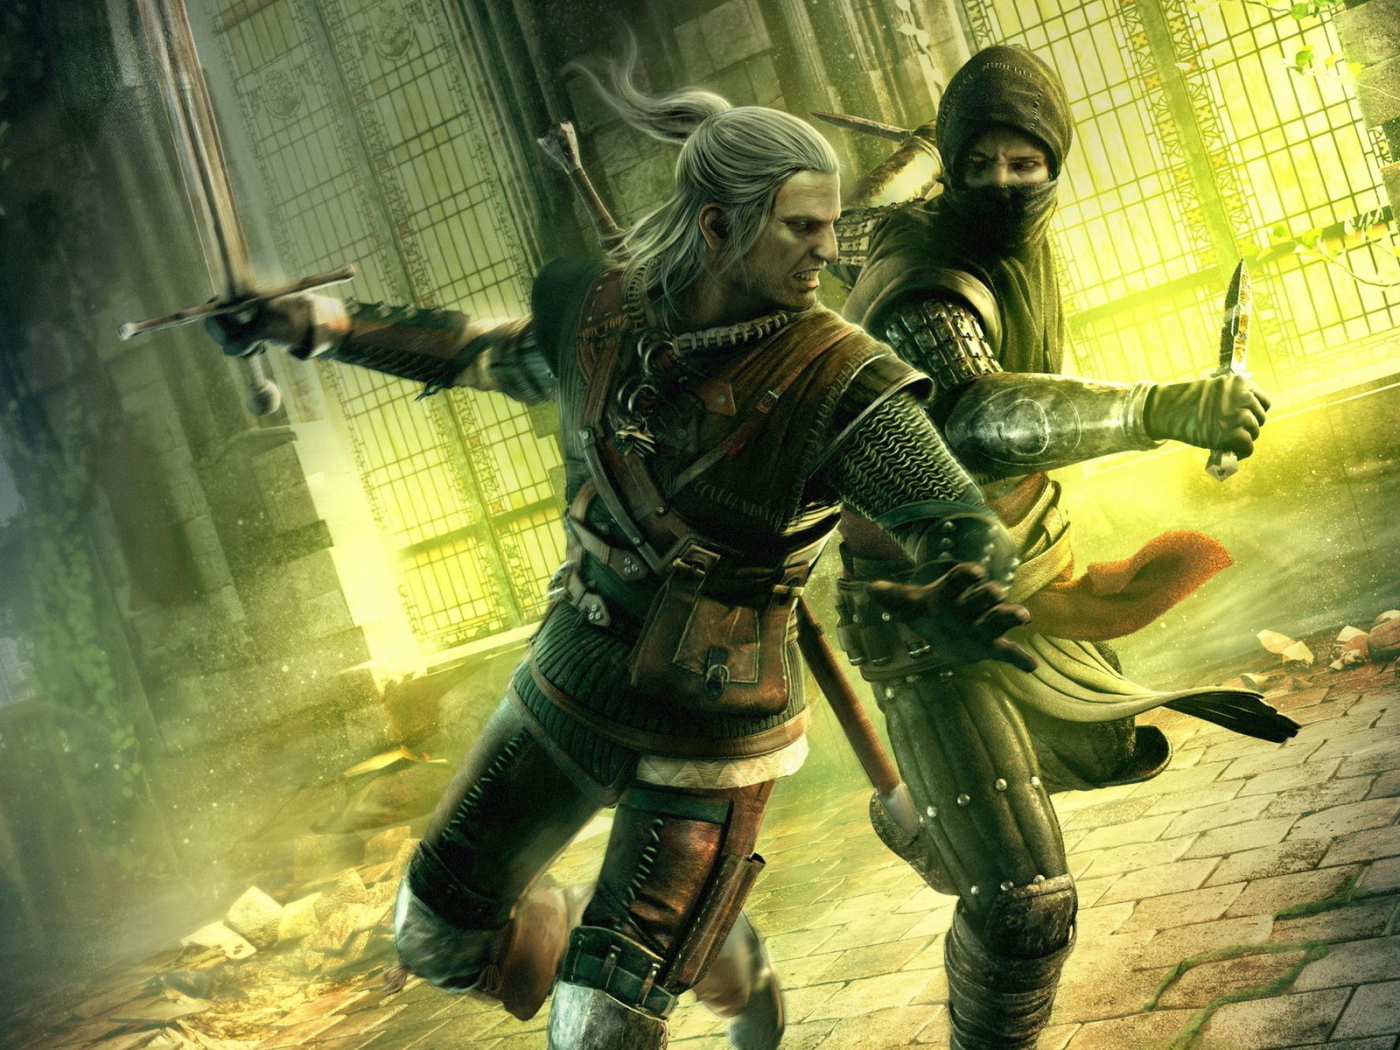 The Witcher 2: Assassins of kings